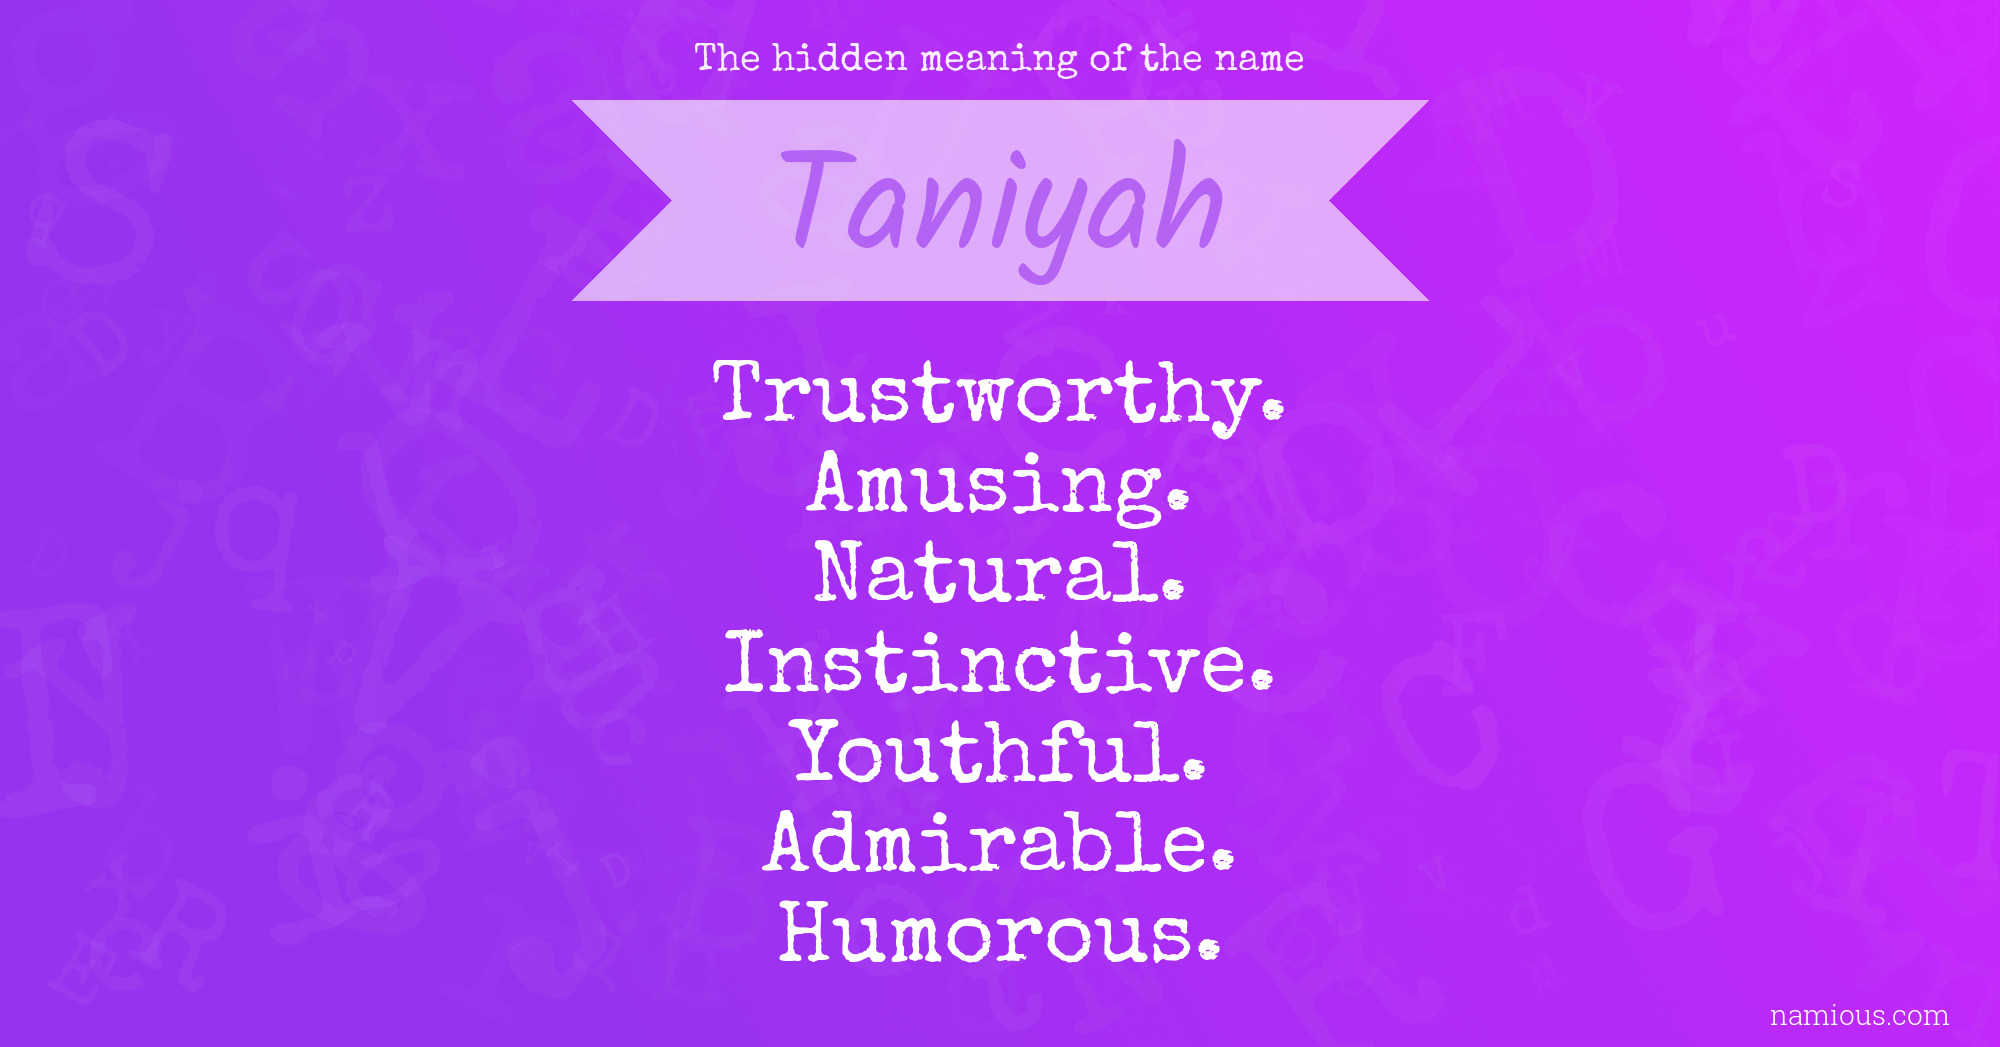 The hidden meaning of the name Taniyah